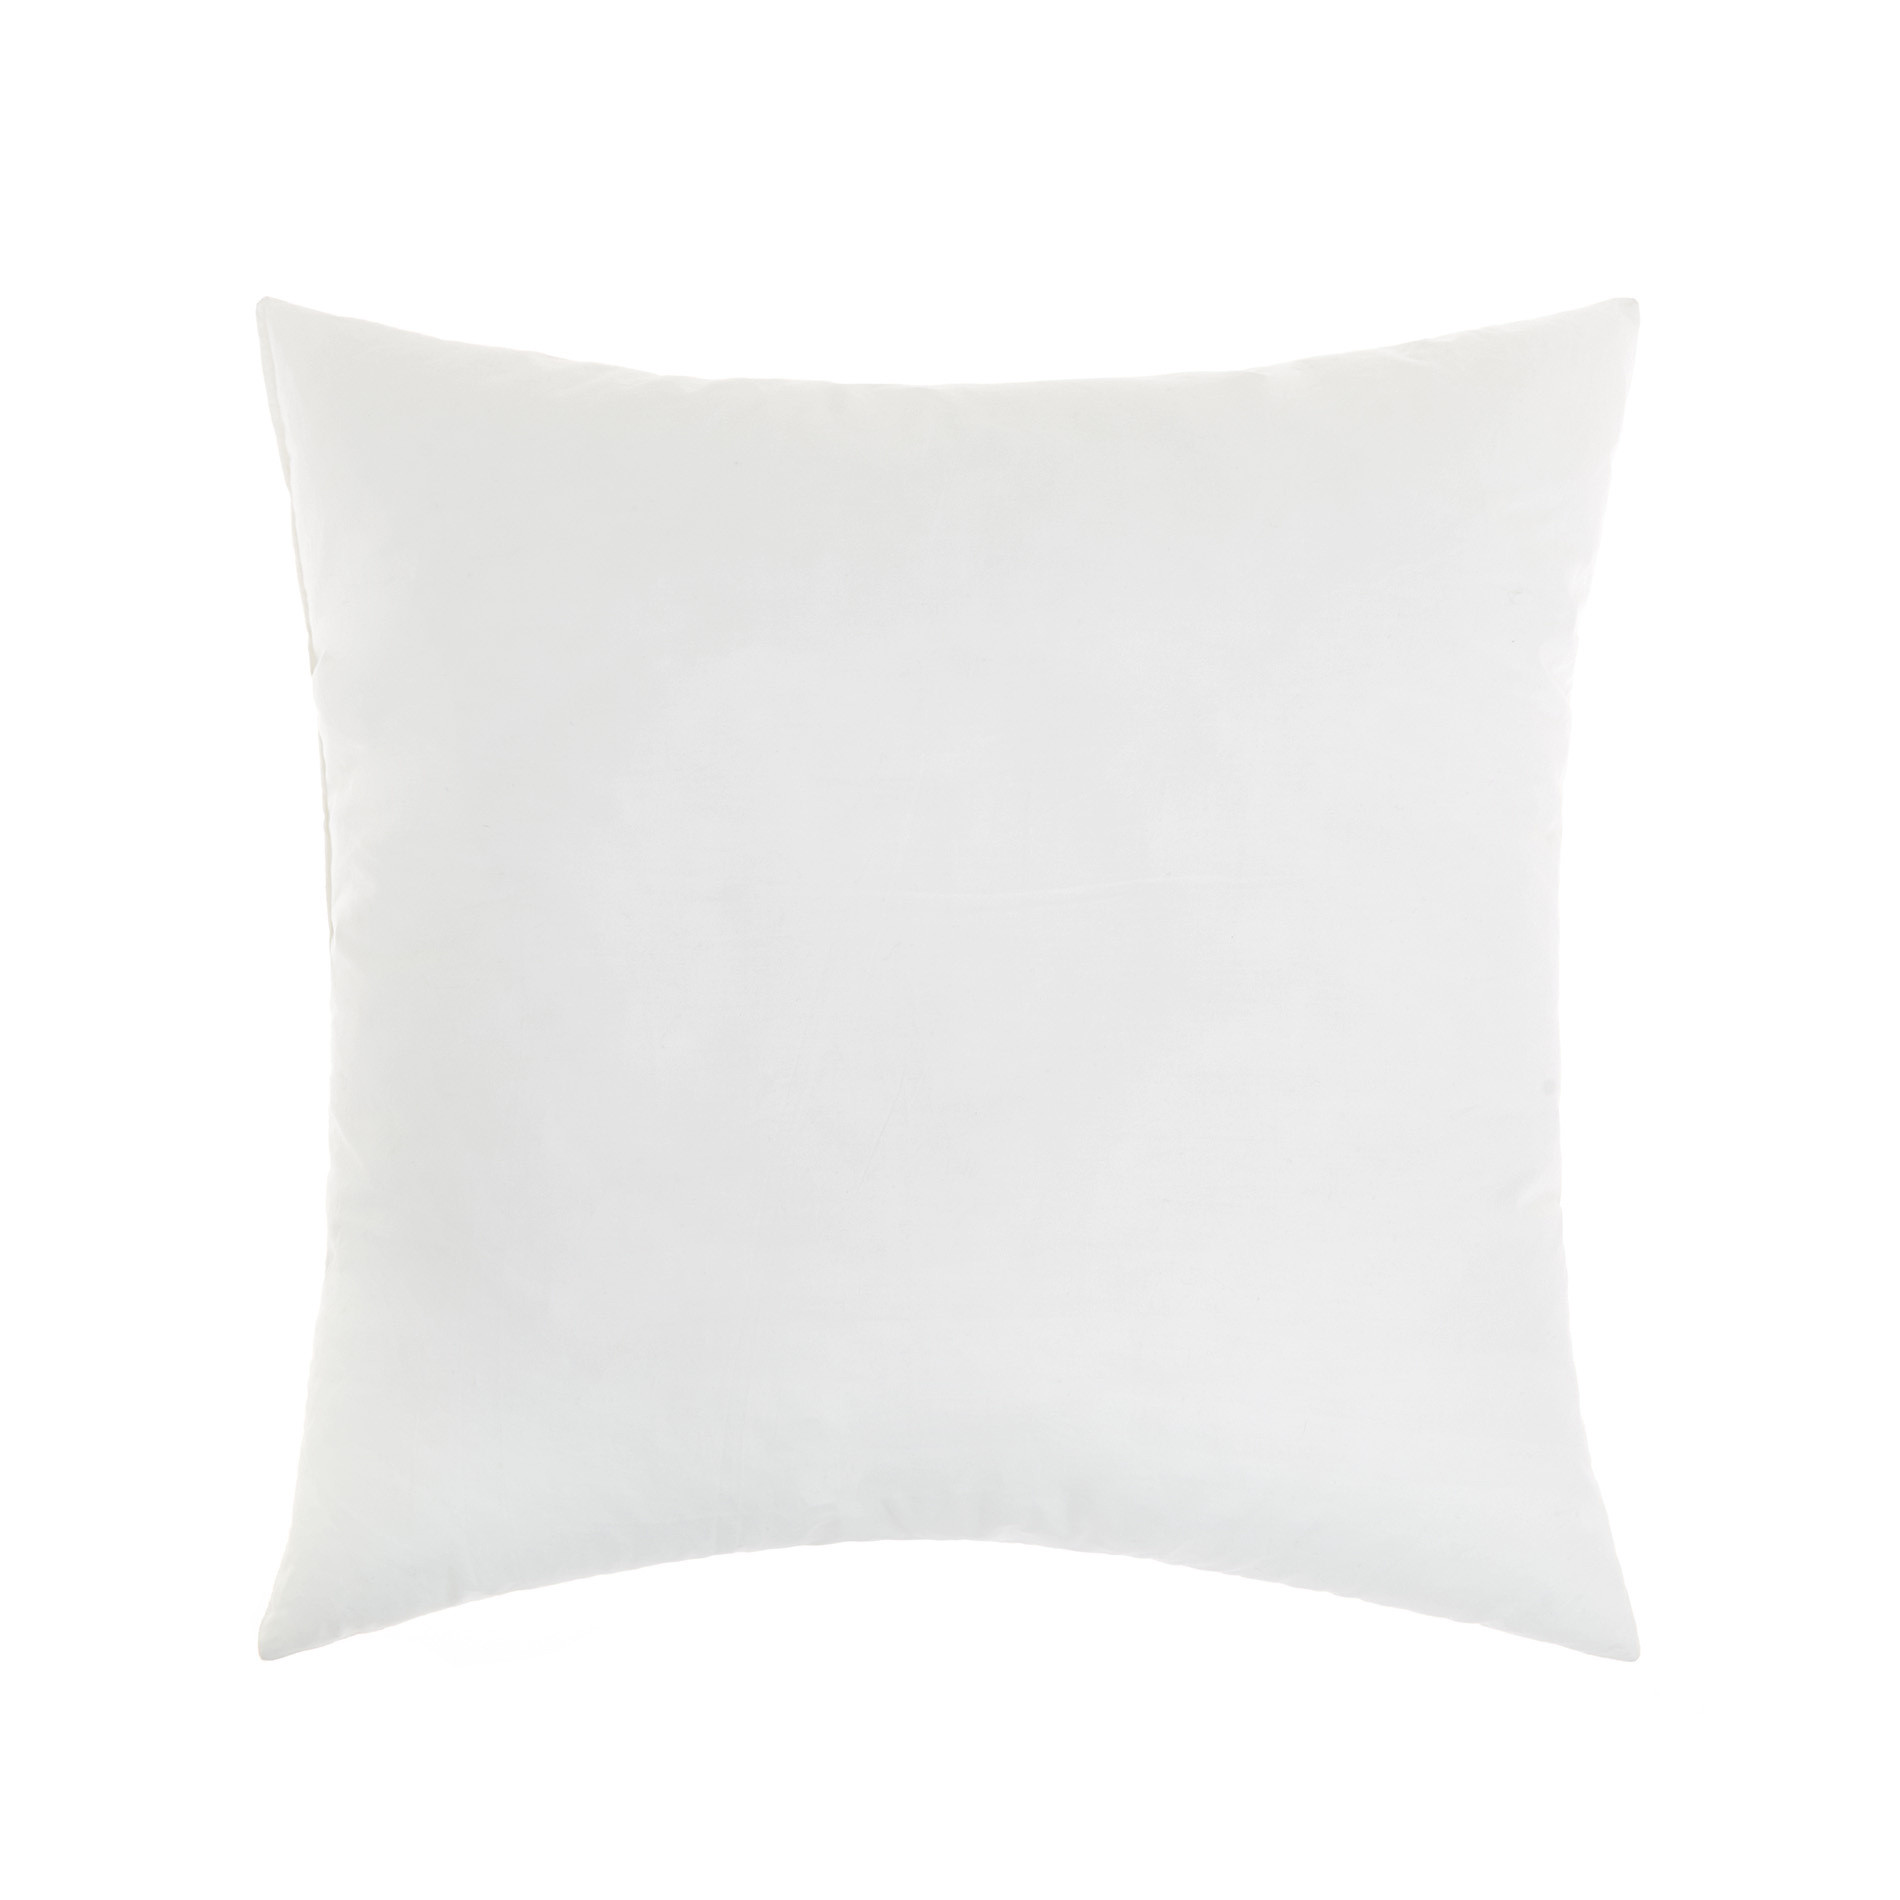 Square pillow in microspheres, White, large image number 0